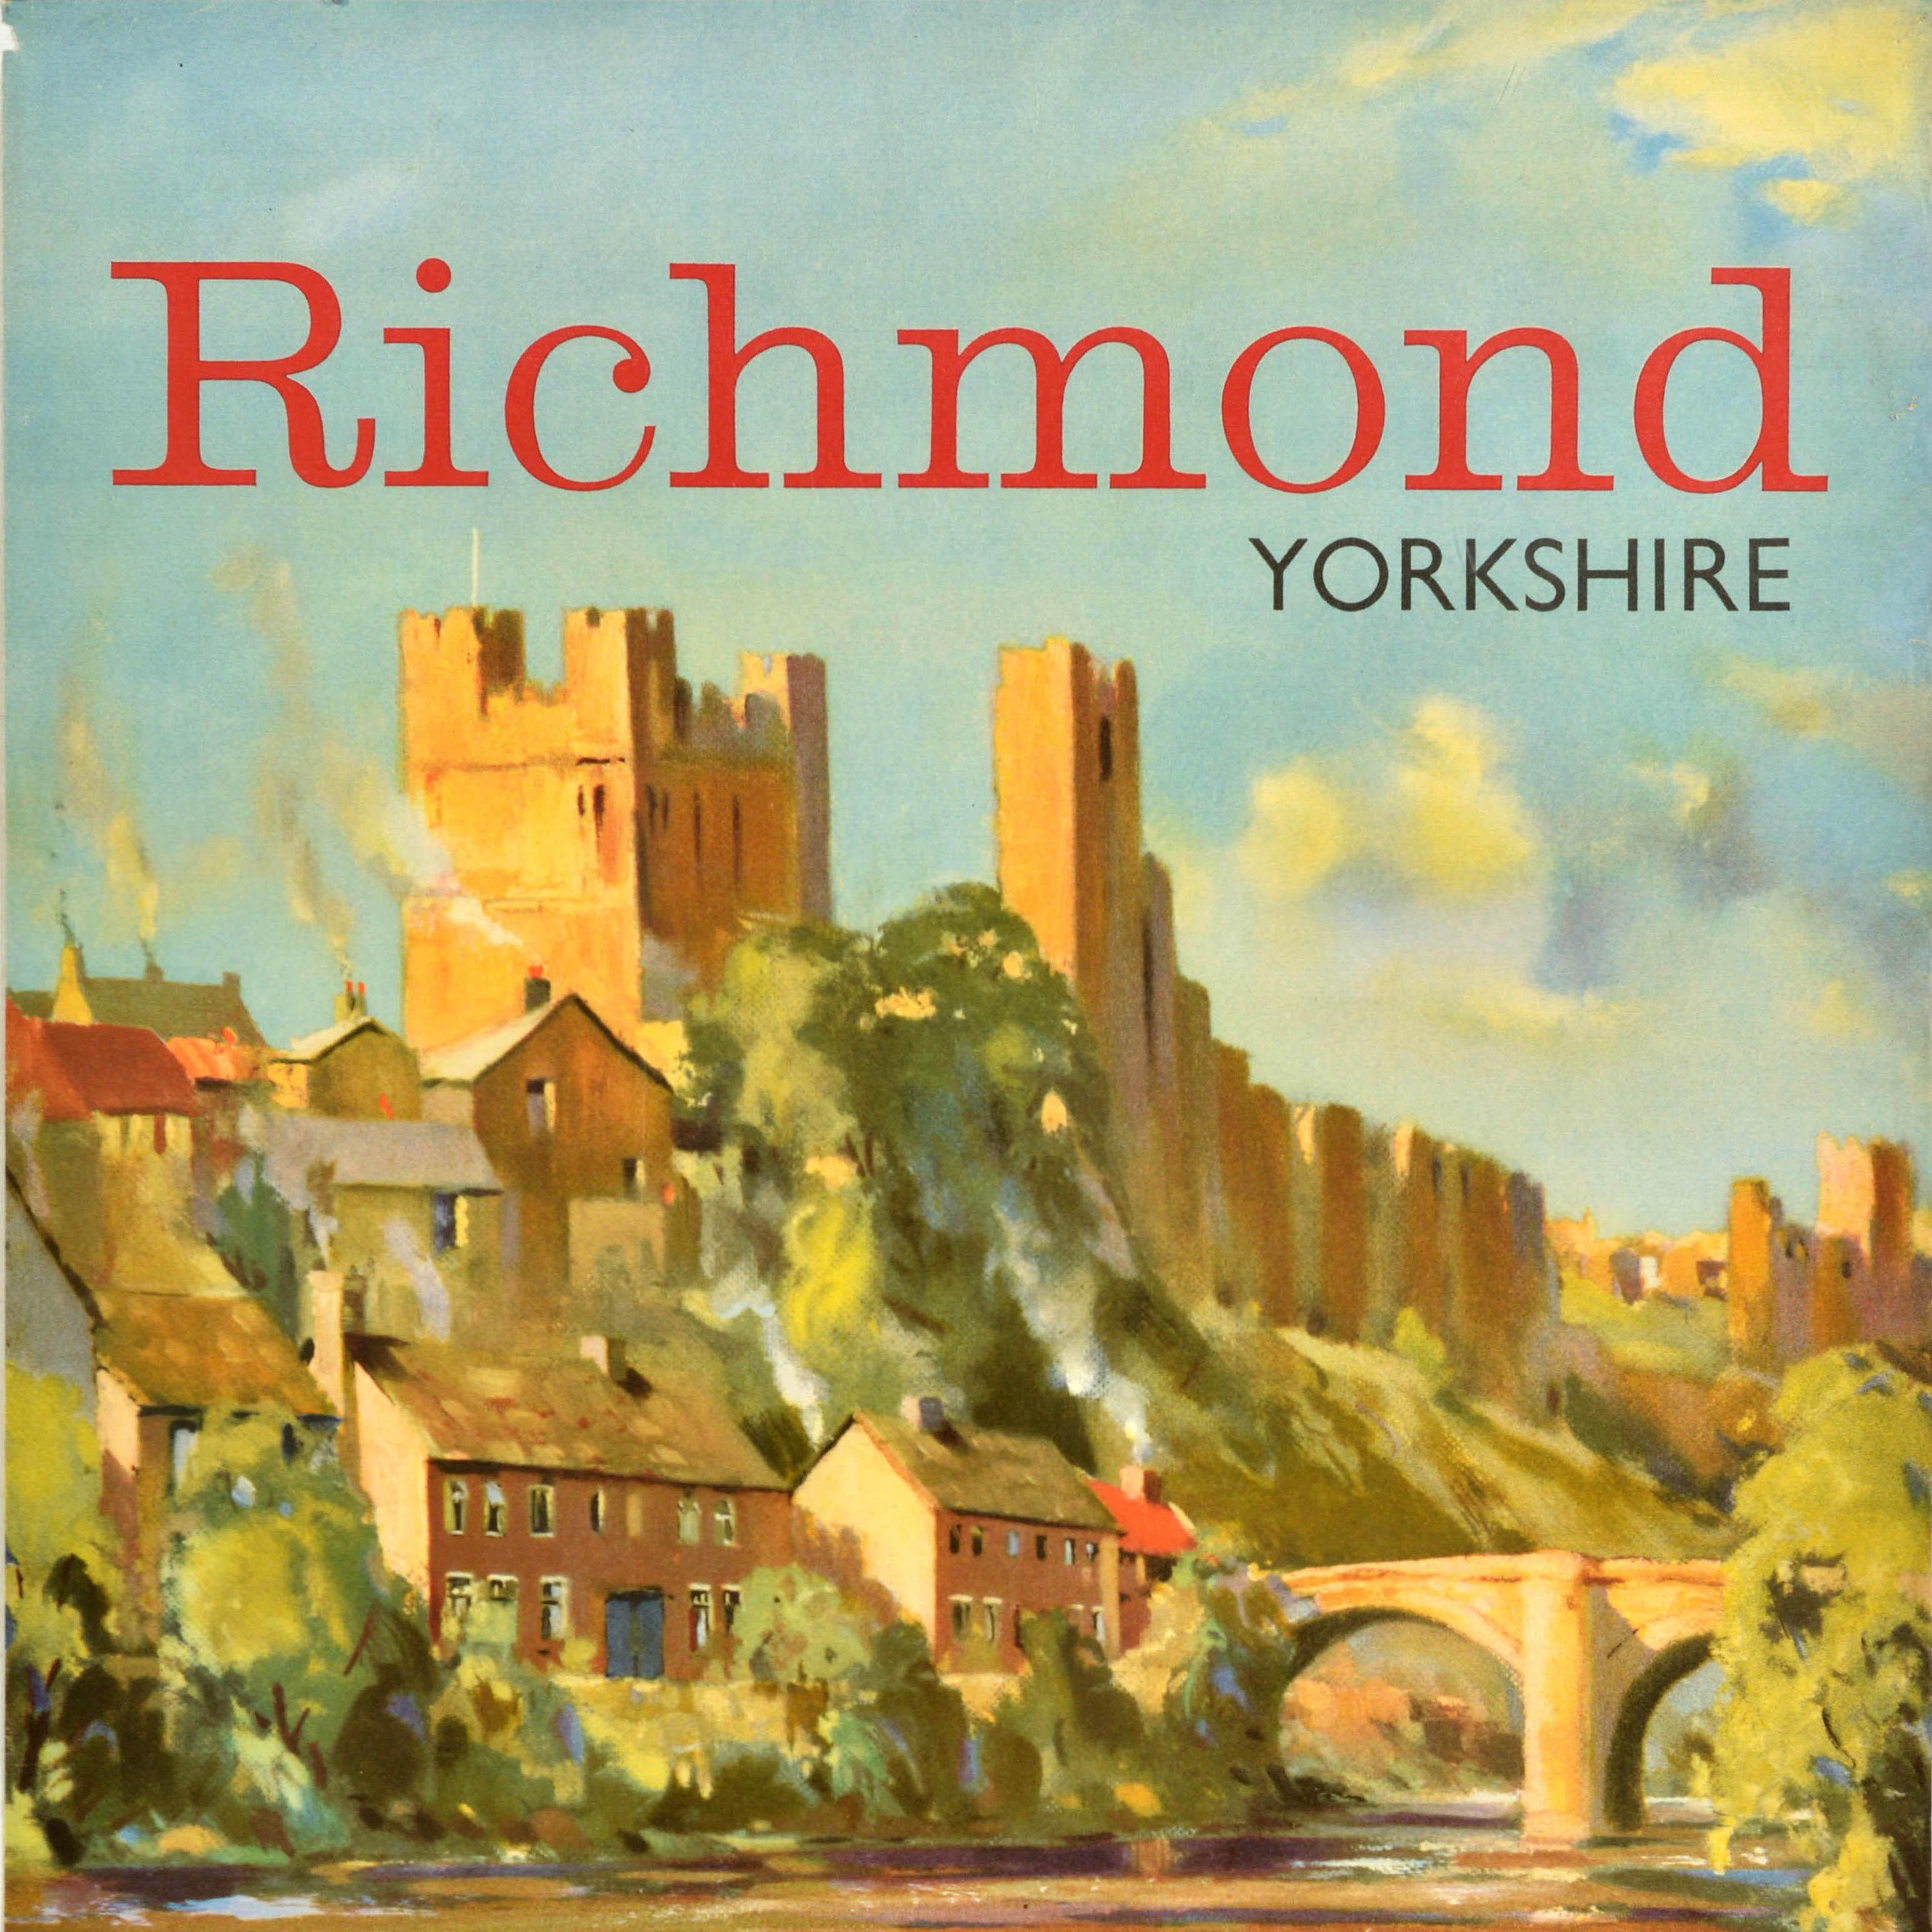 Original vintage railway travel poster advertising Richmond Yorkshire featuring a painting by Edward Wesson (1910-1983) of the historic Richmond Castle on a hill with trees and houses, smoke rising from their chimneys, leading down to the River